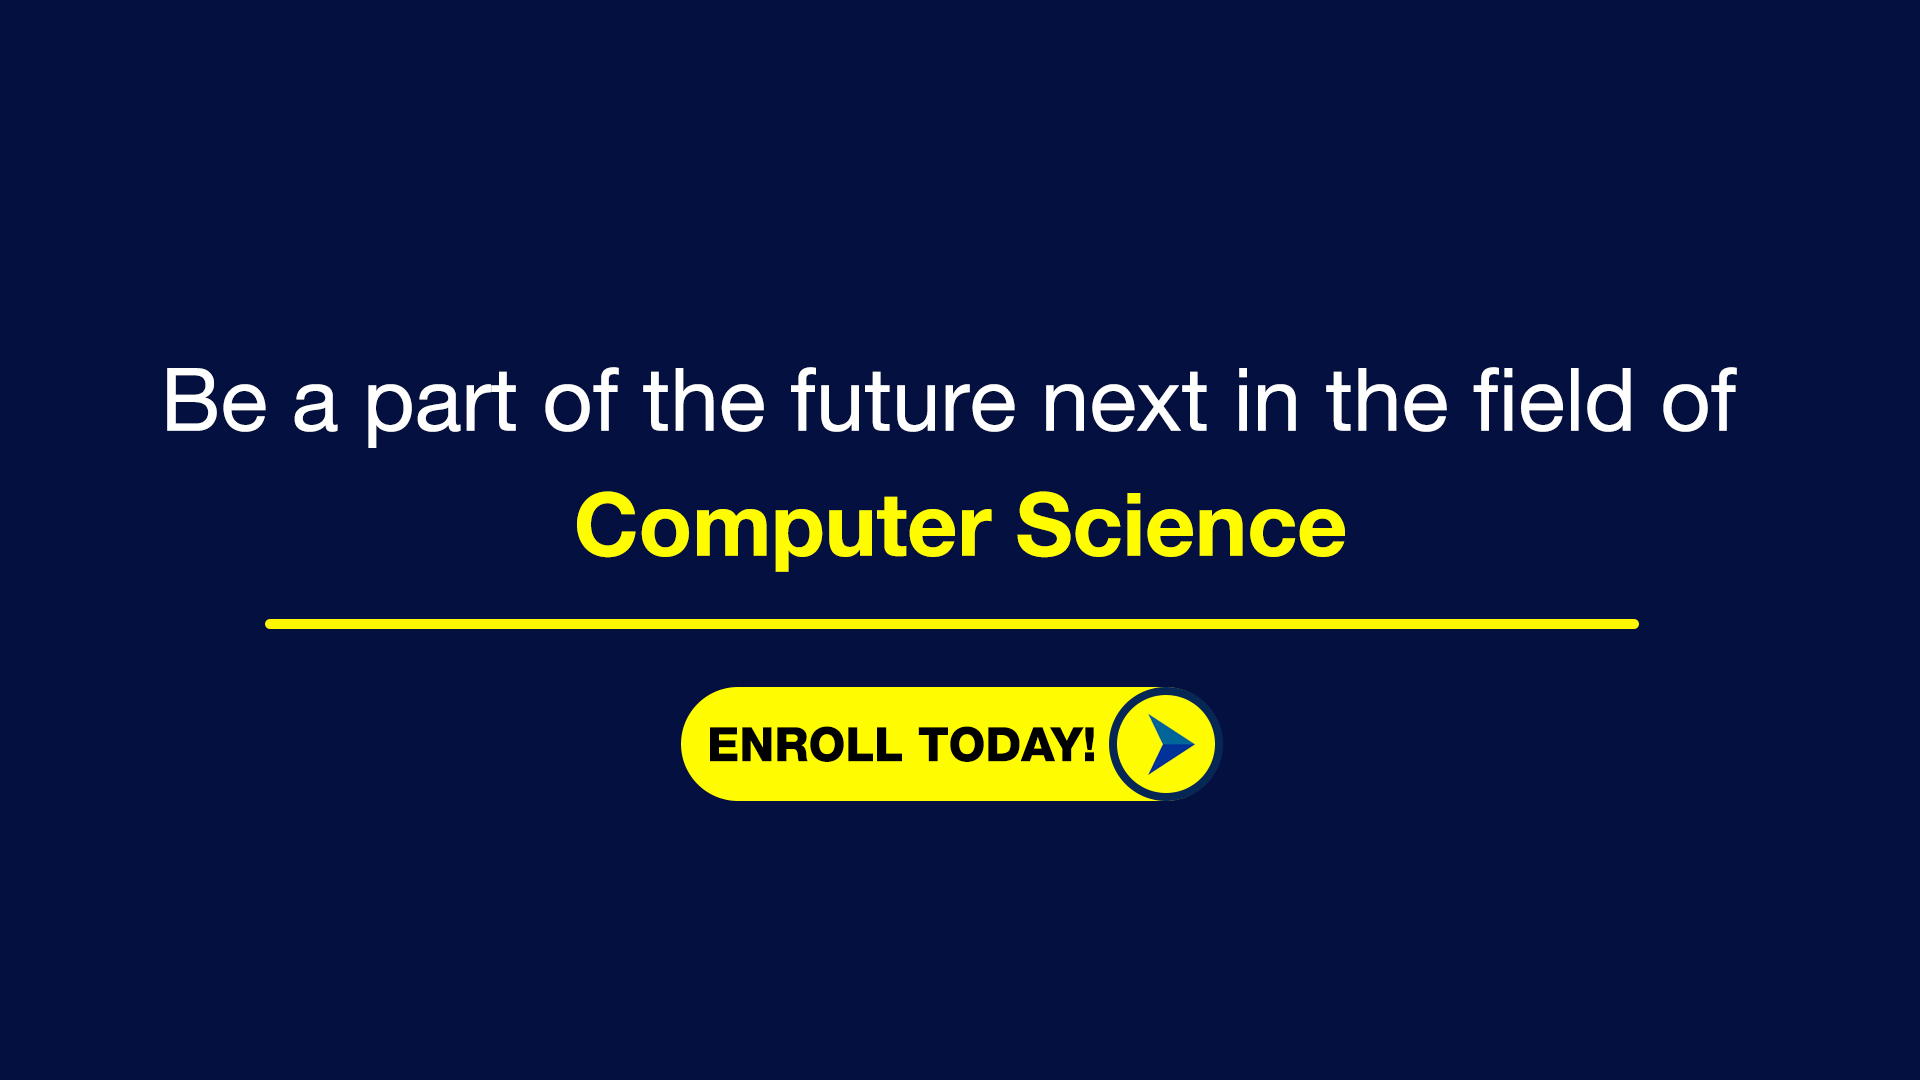 Master of Science Degree Programme in Computer Science